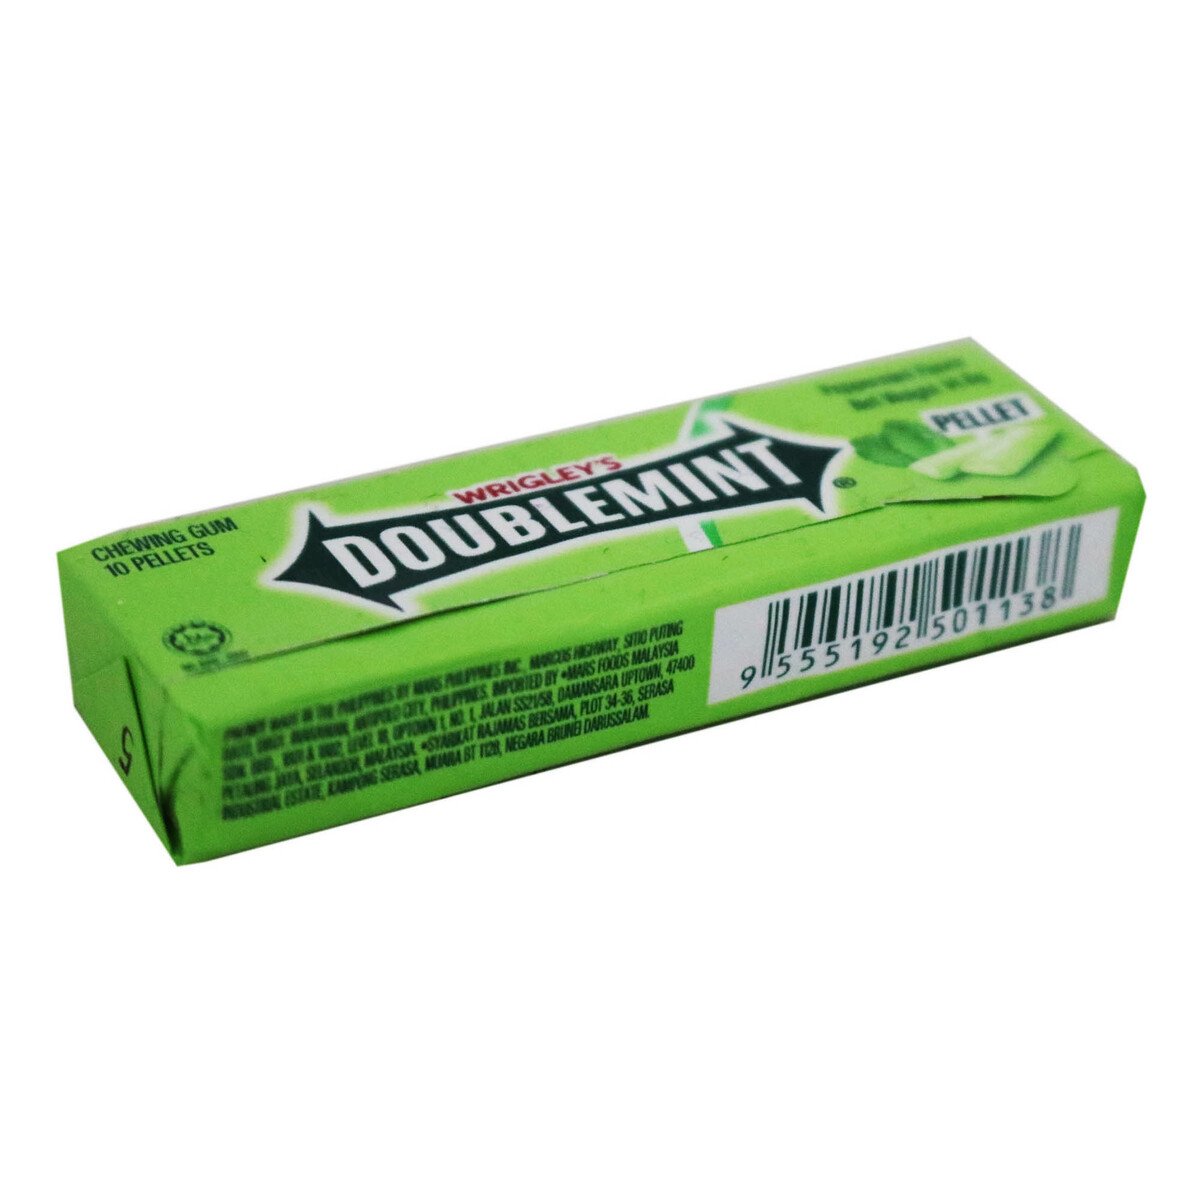 Doublemint Chewing Gum 14.6g